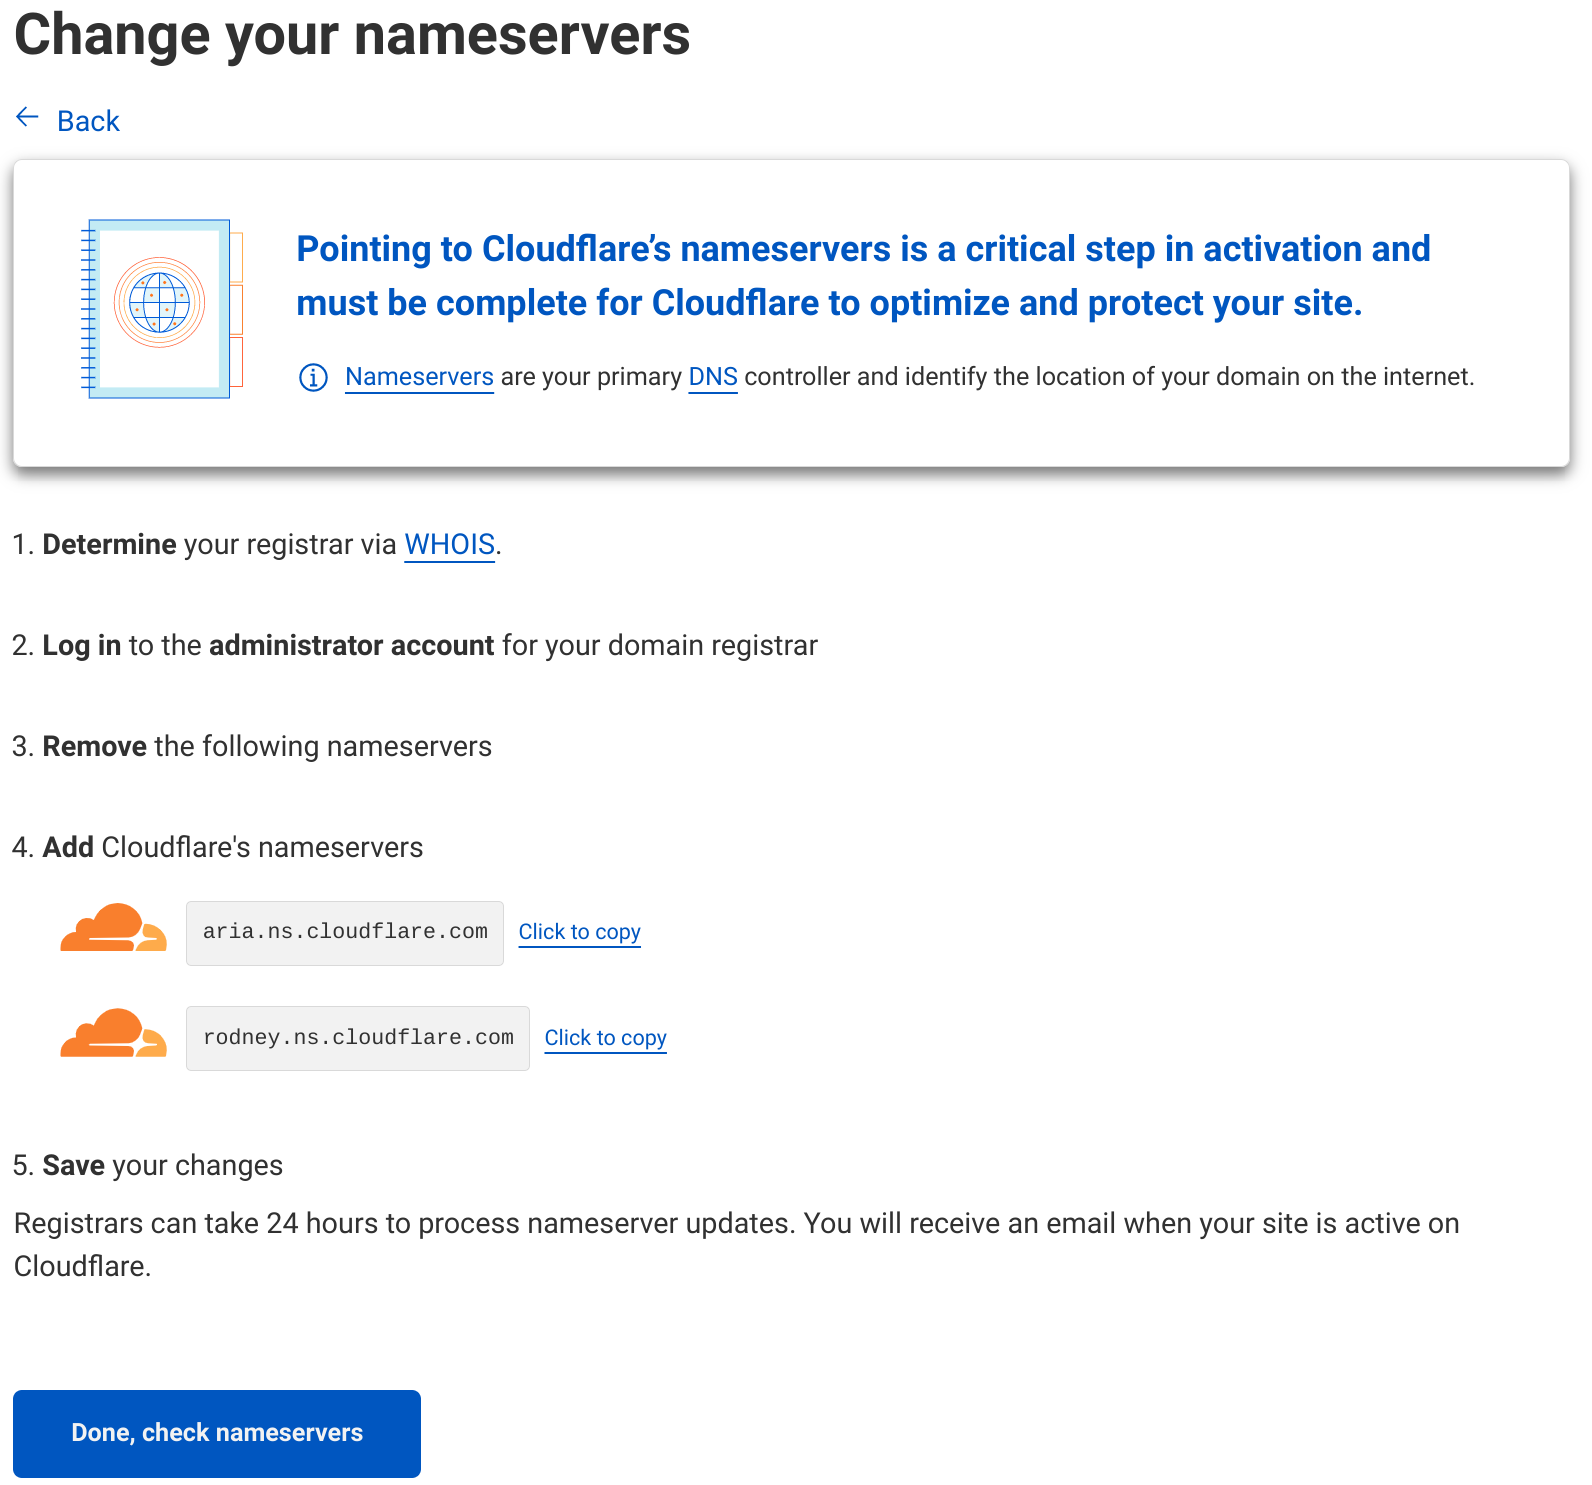 Update nameserver to Cloudflare